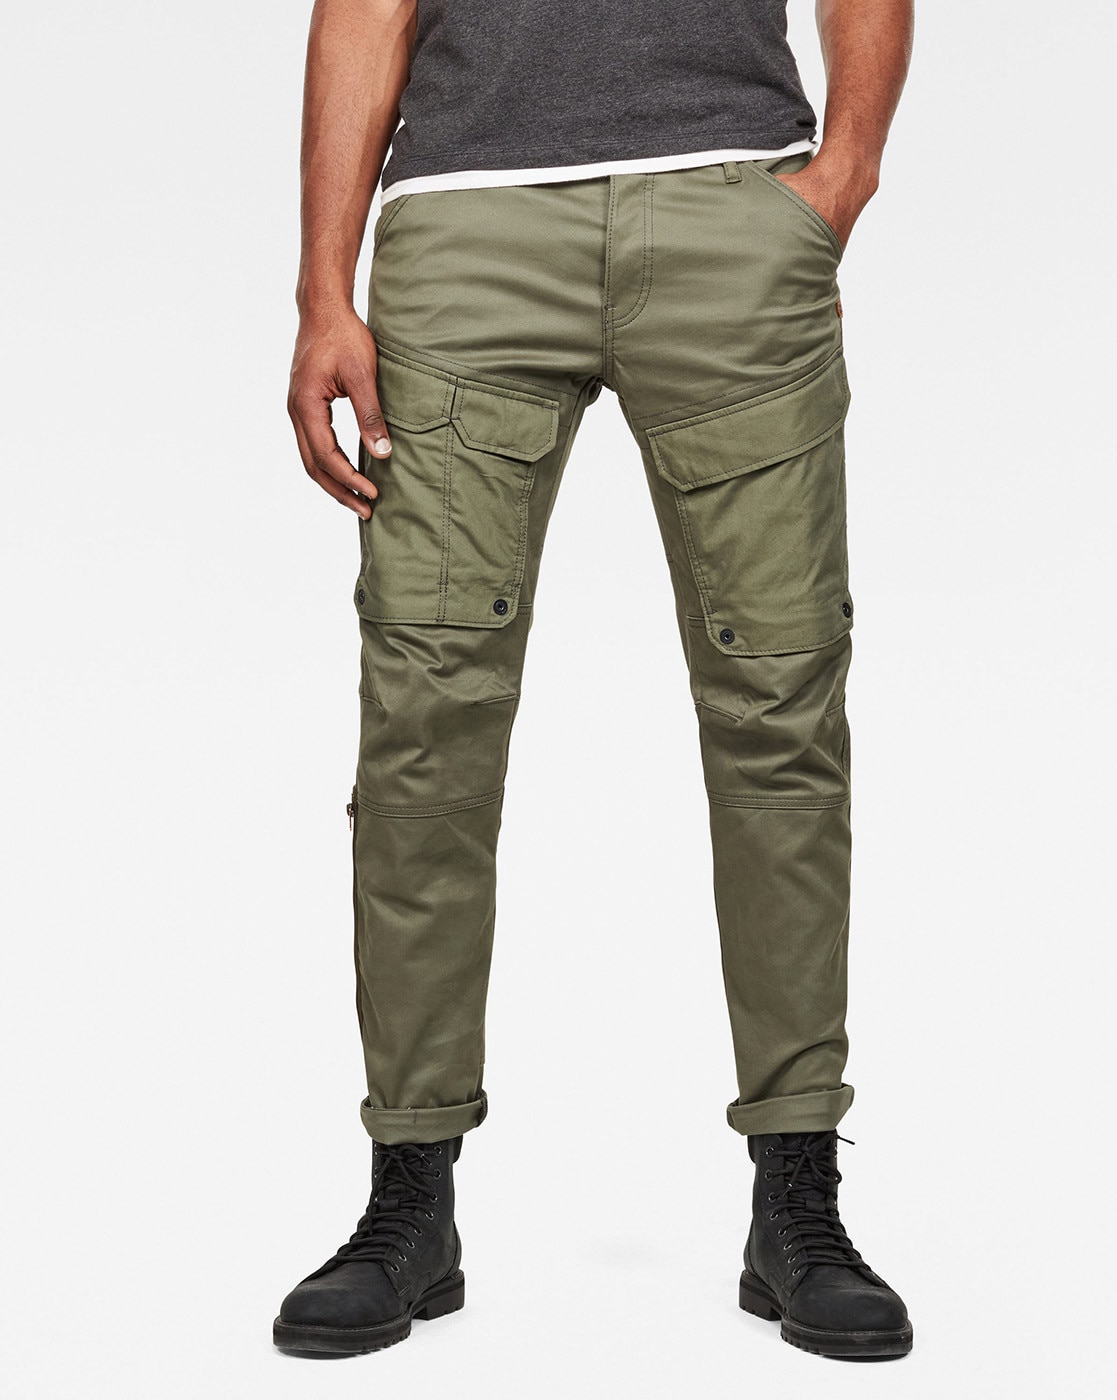 Buy Olive Trousers  Pants for Men by Aazing London Online  Ajiocom